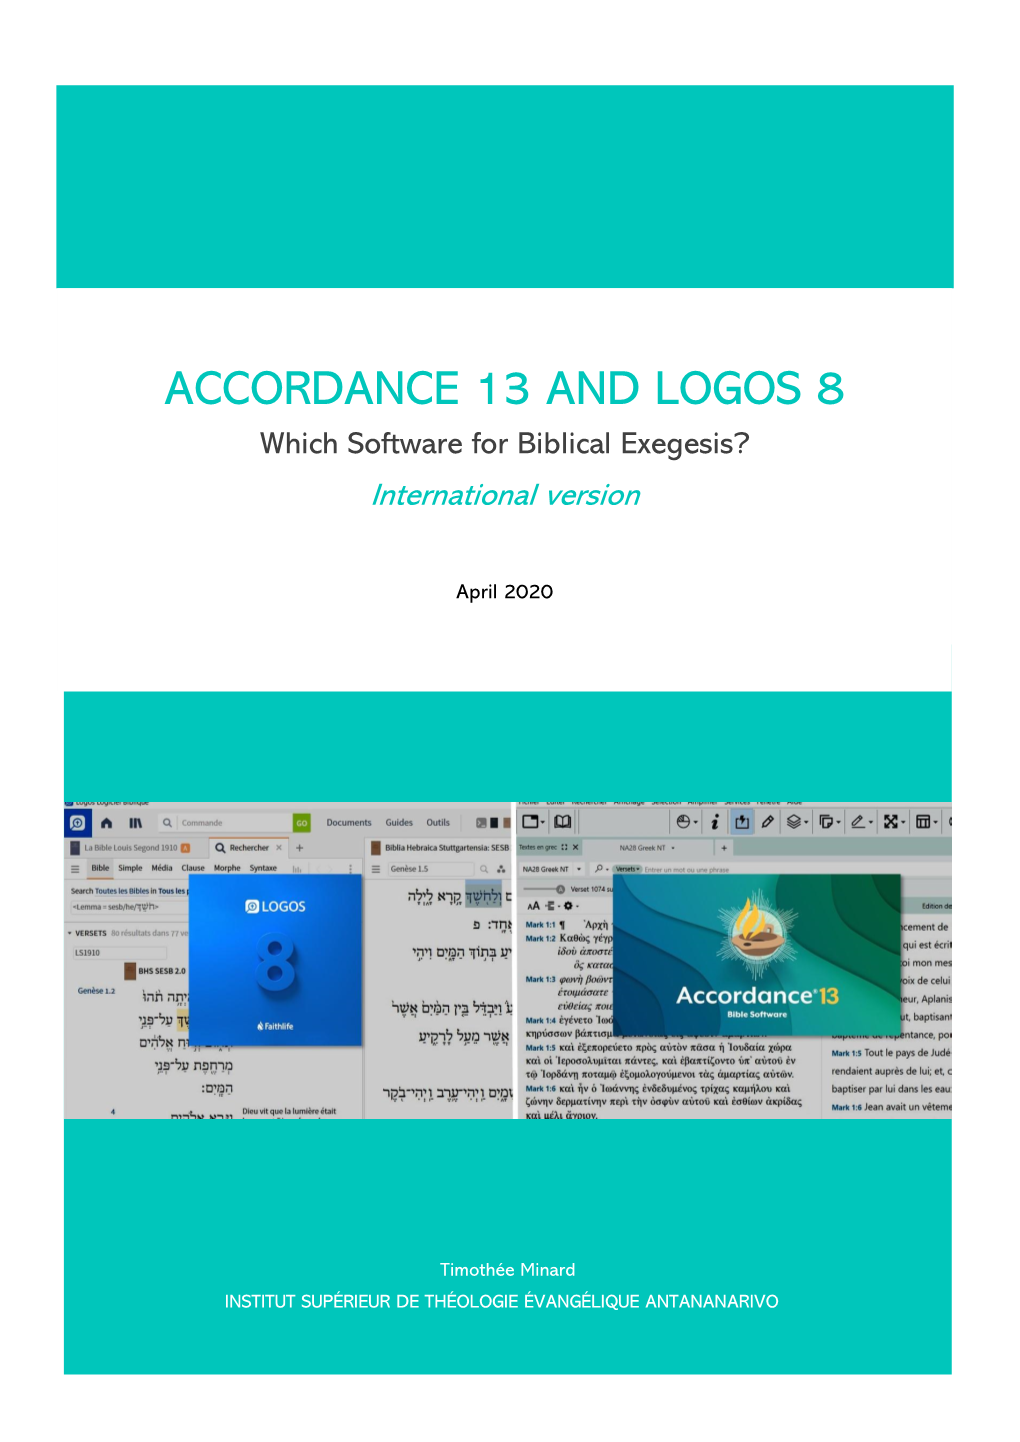 ACCORDANCE 13 and LOGOS 8 Which Software for Biblical Exegesis? International Version